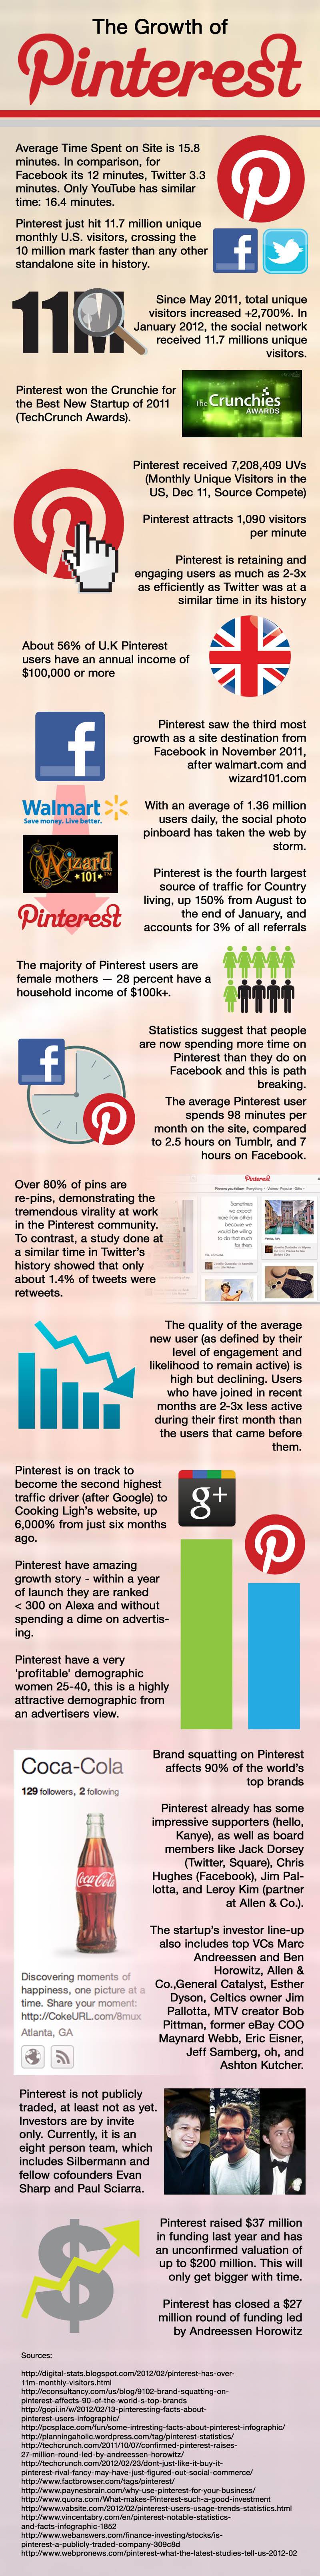 The Growth of Pinterest (Infographic)